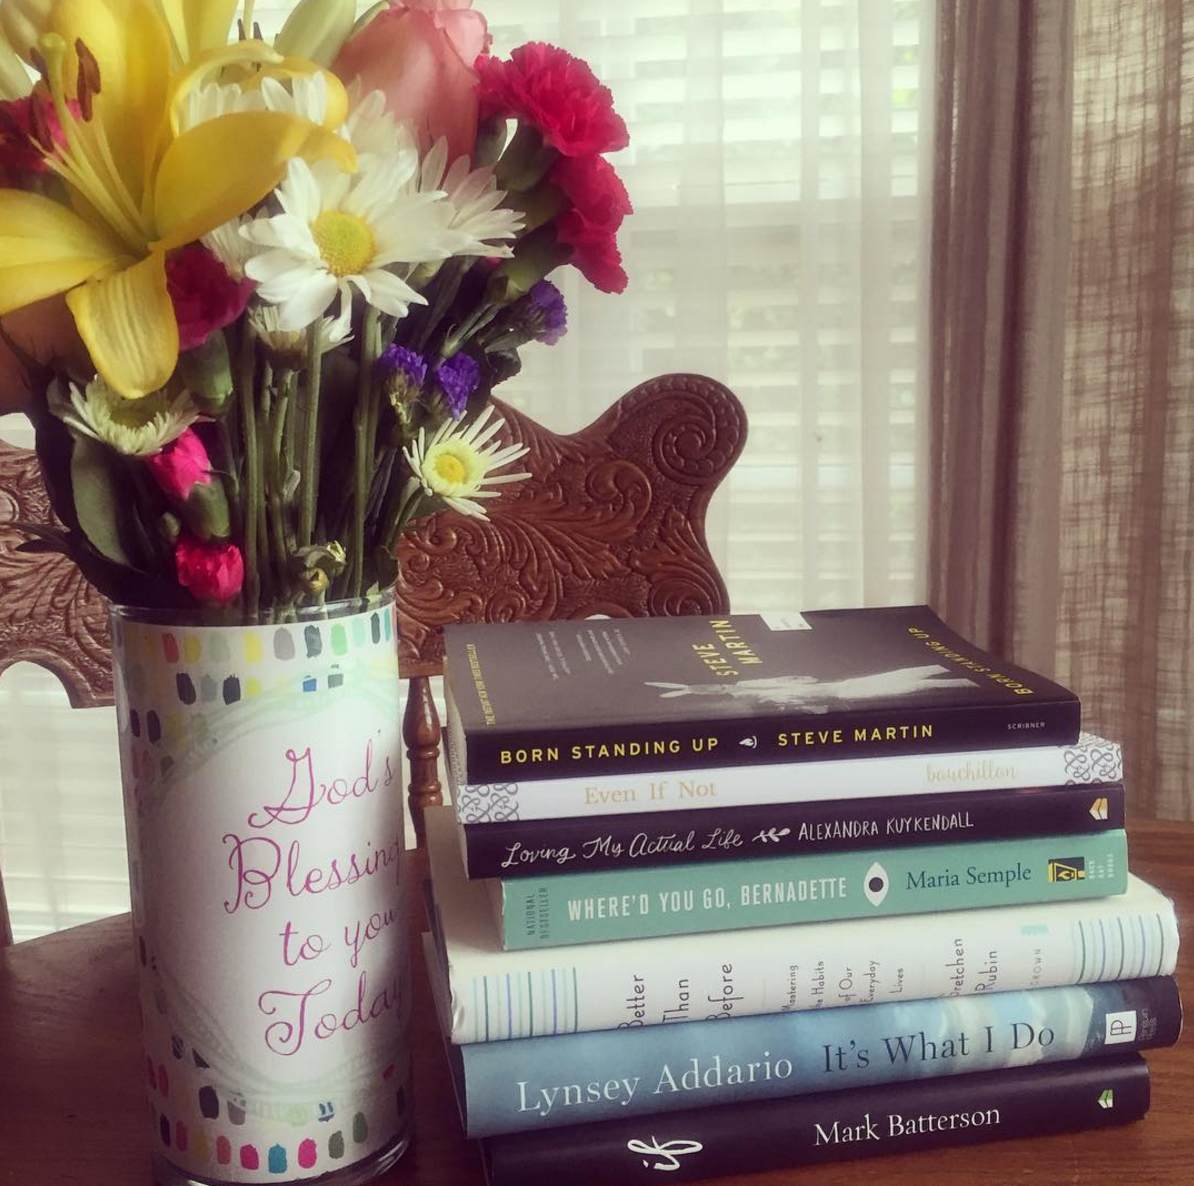 The 8 Books I Read Last Week + What I'm Reading This Week